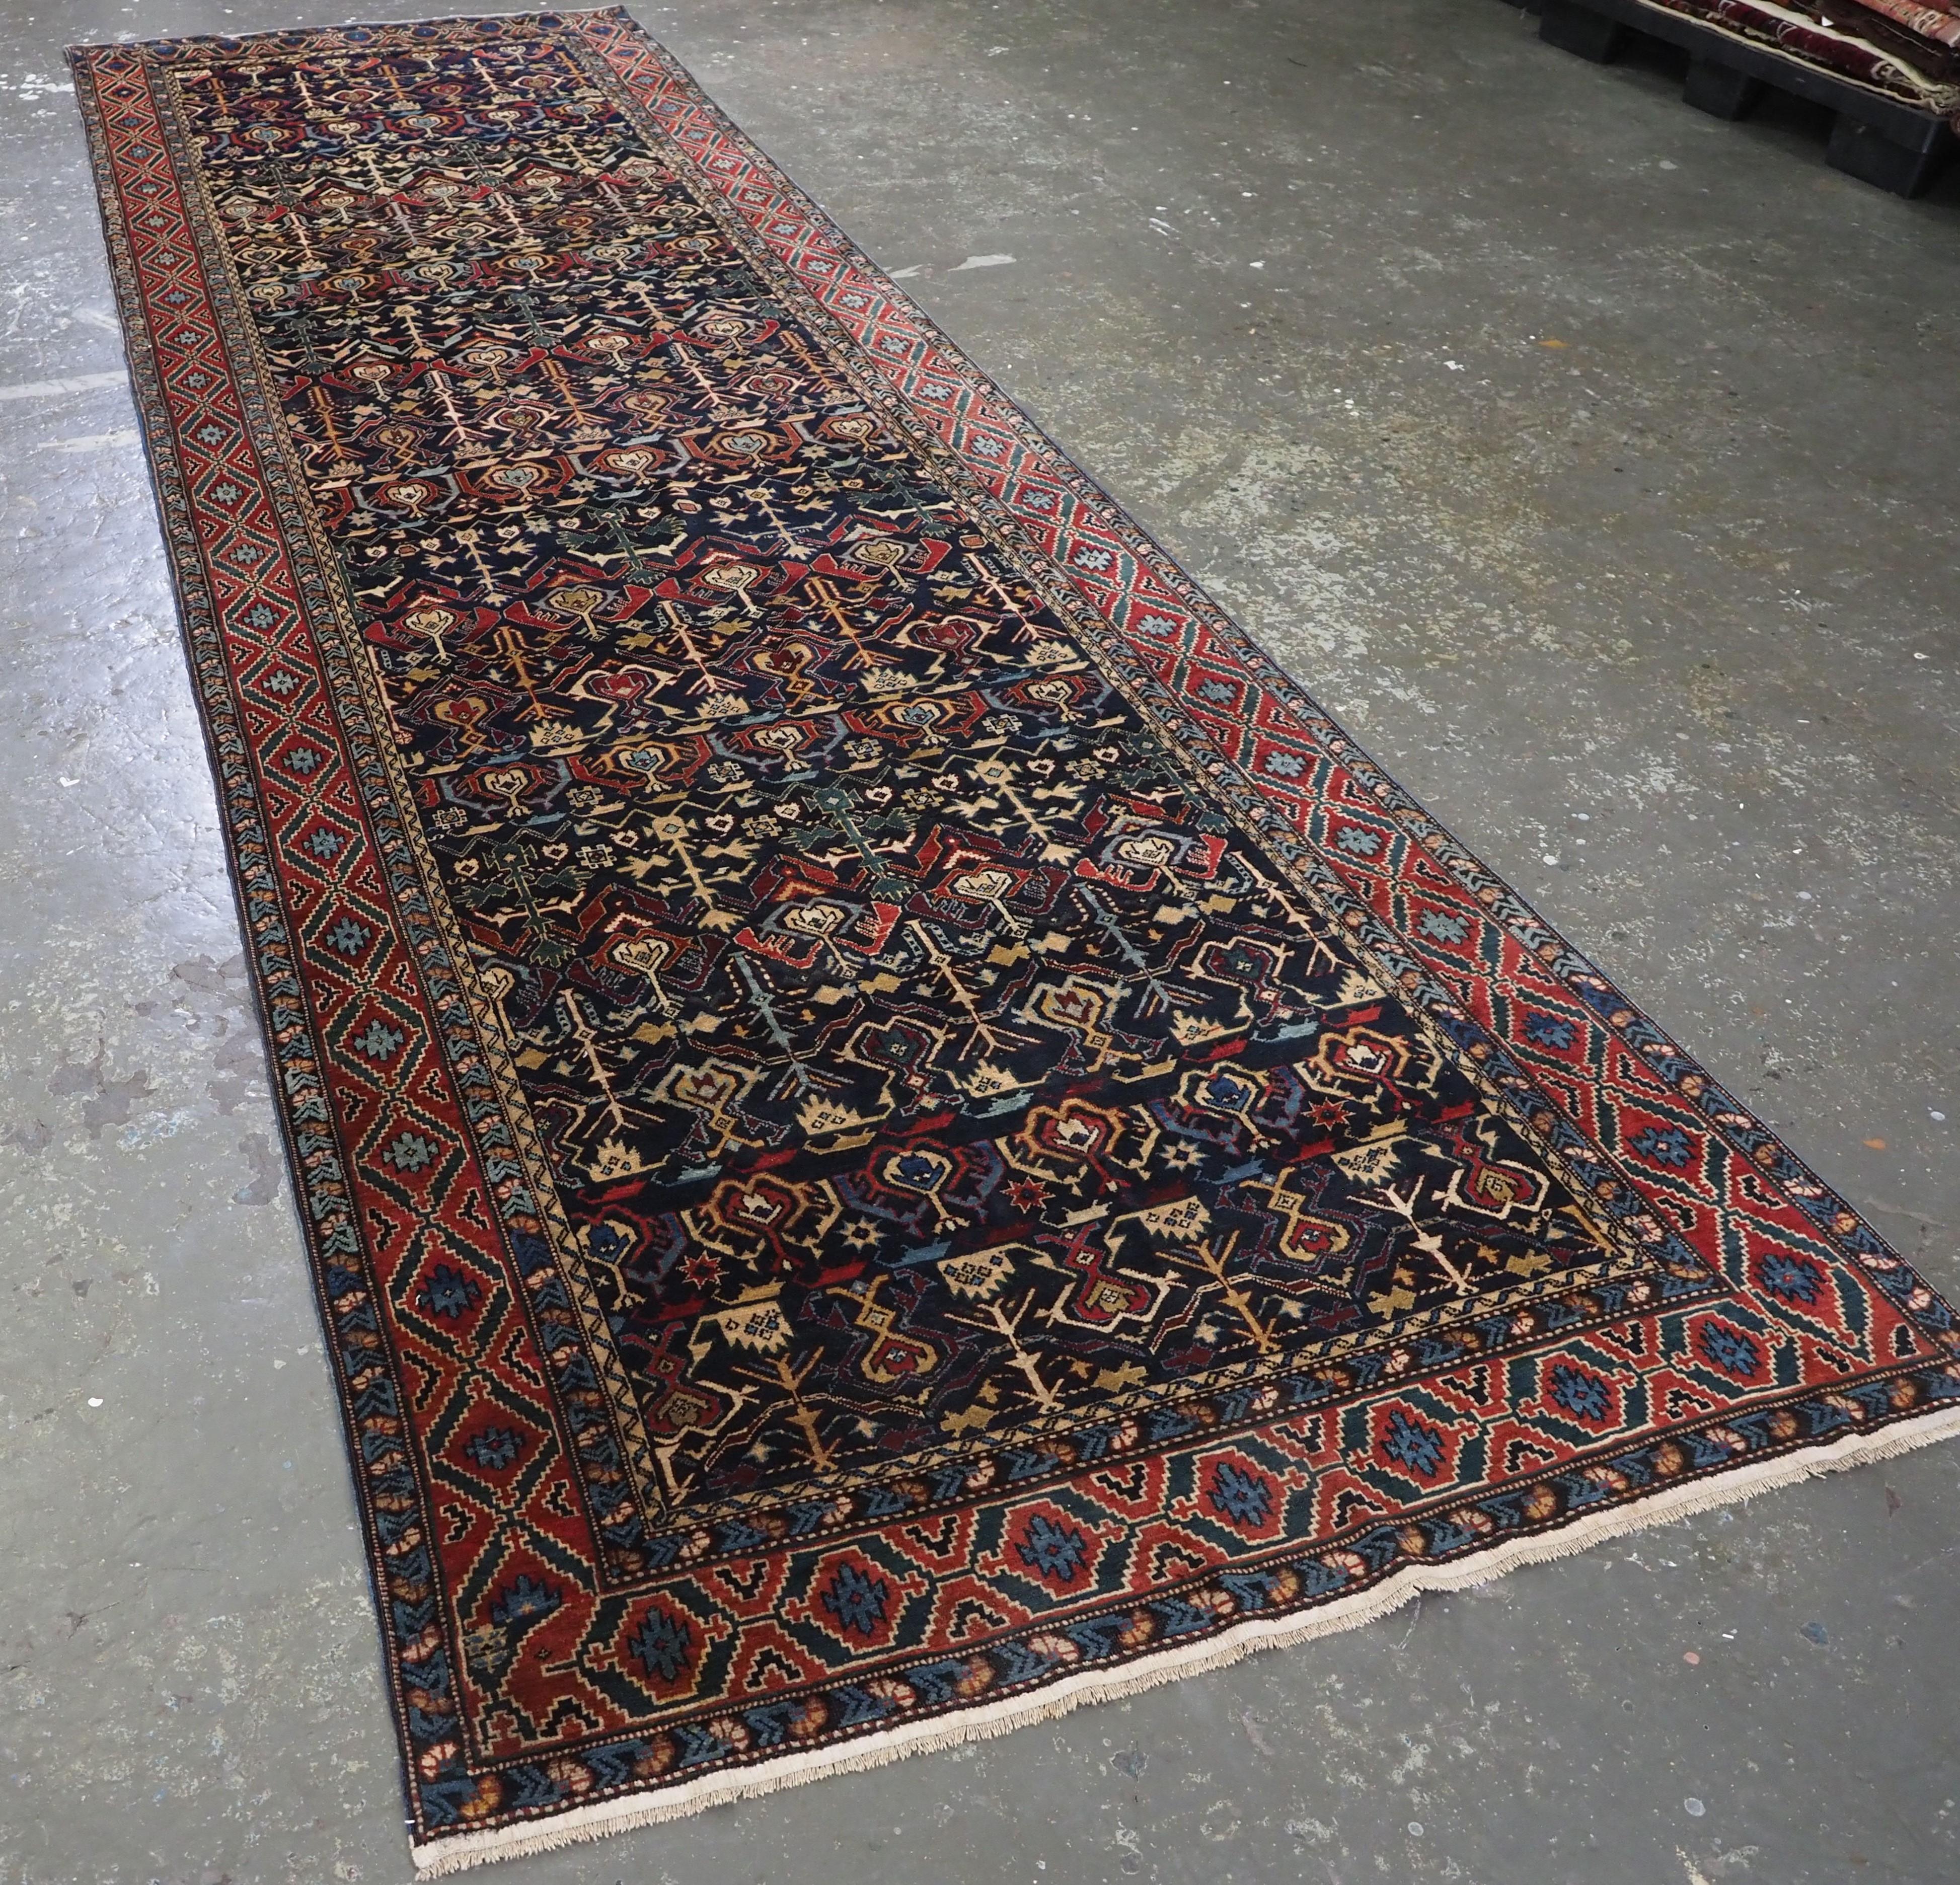 Size: 14ft 2in x 4ft 3in (433 x 129cm).

Antique Caucasian Kuba region 'Konagkend' runner, with all over repeat design.

Circa 1900.

The dark indigo field is filled with finely drawn repeat design, typical of those found in the Kuba region